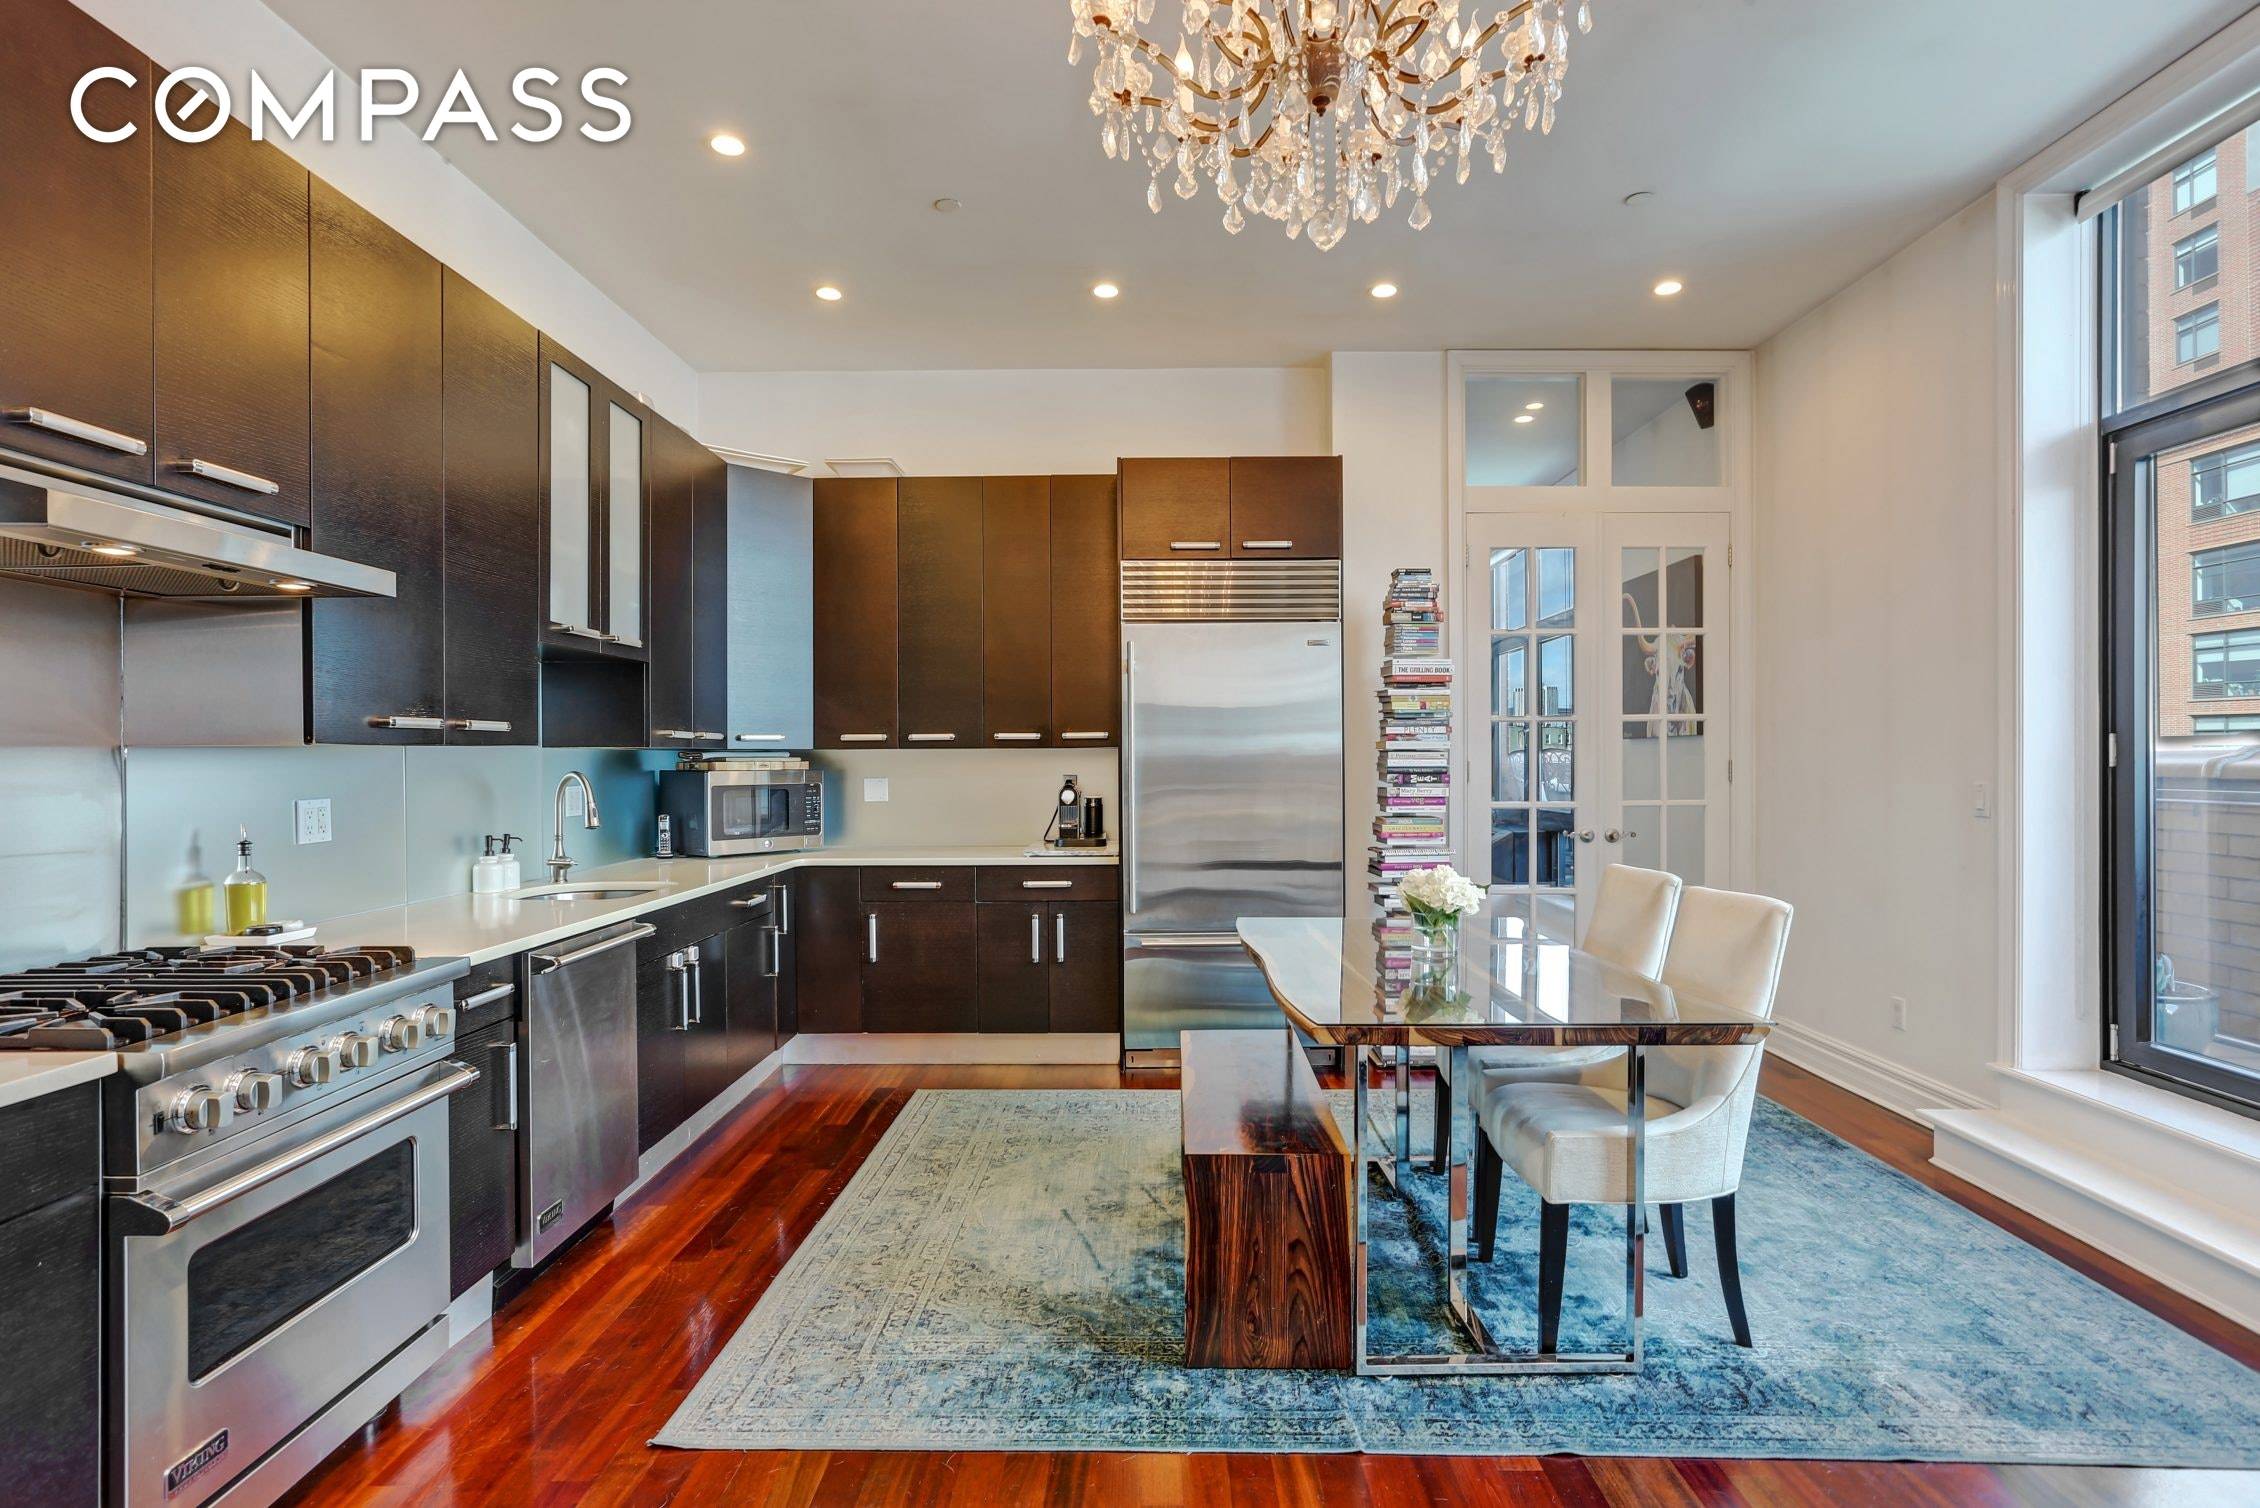 A three bedroom, two bathroom PH home with soaring ceilings of nearly 11 feet at the border of two of Brooklyns most coveted neighborhoods Cobble Hill and Boerum Hill.